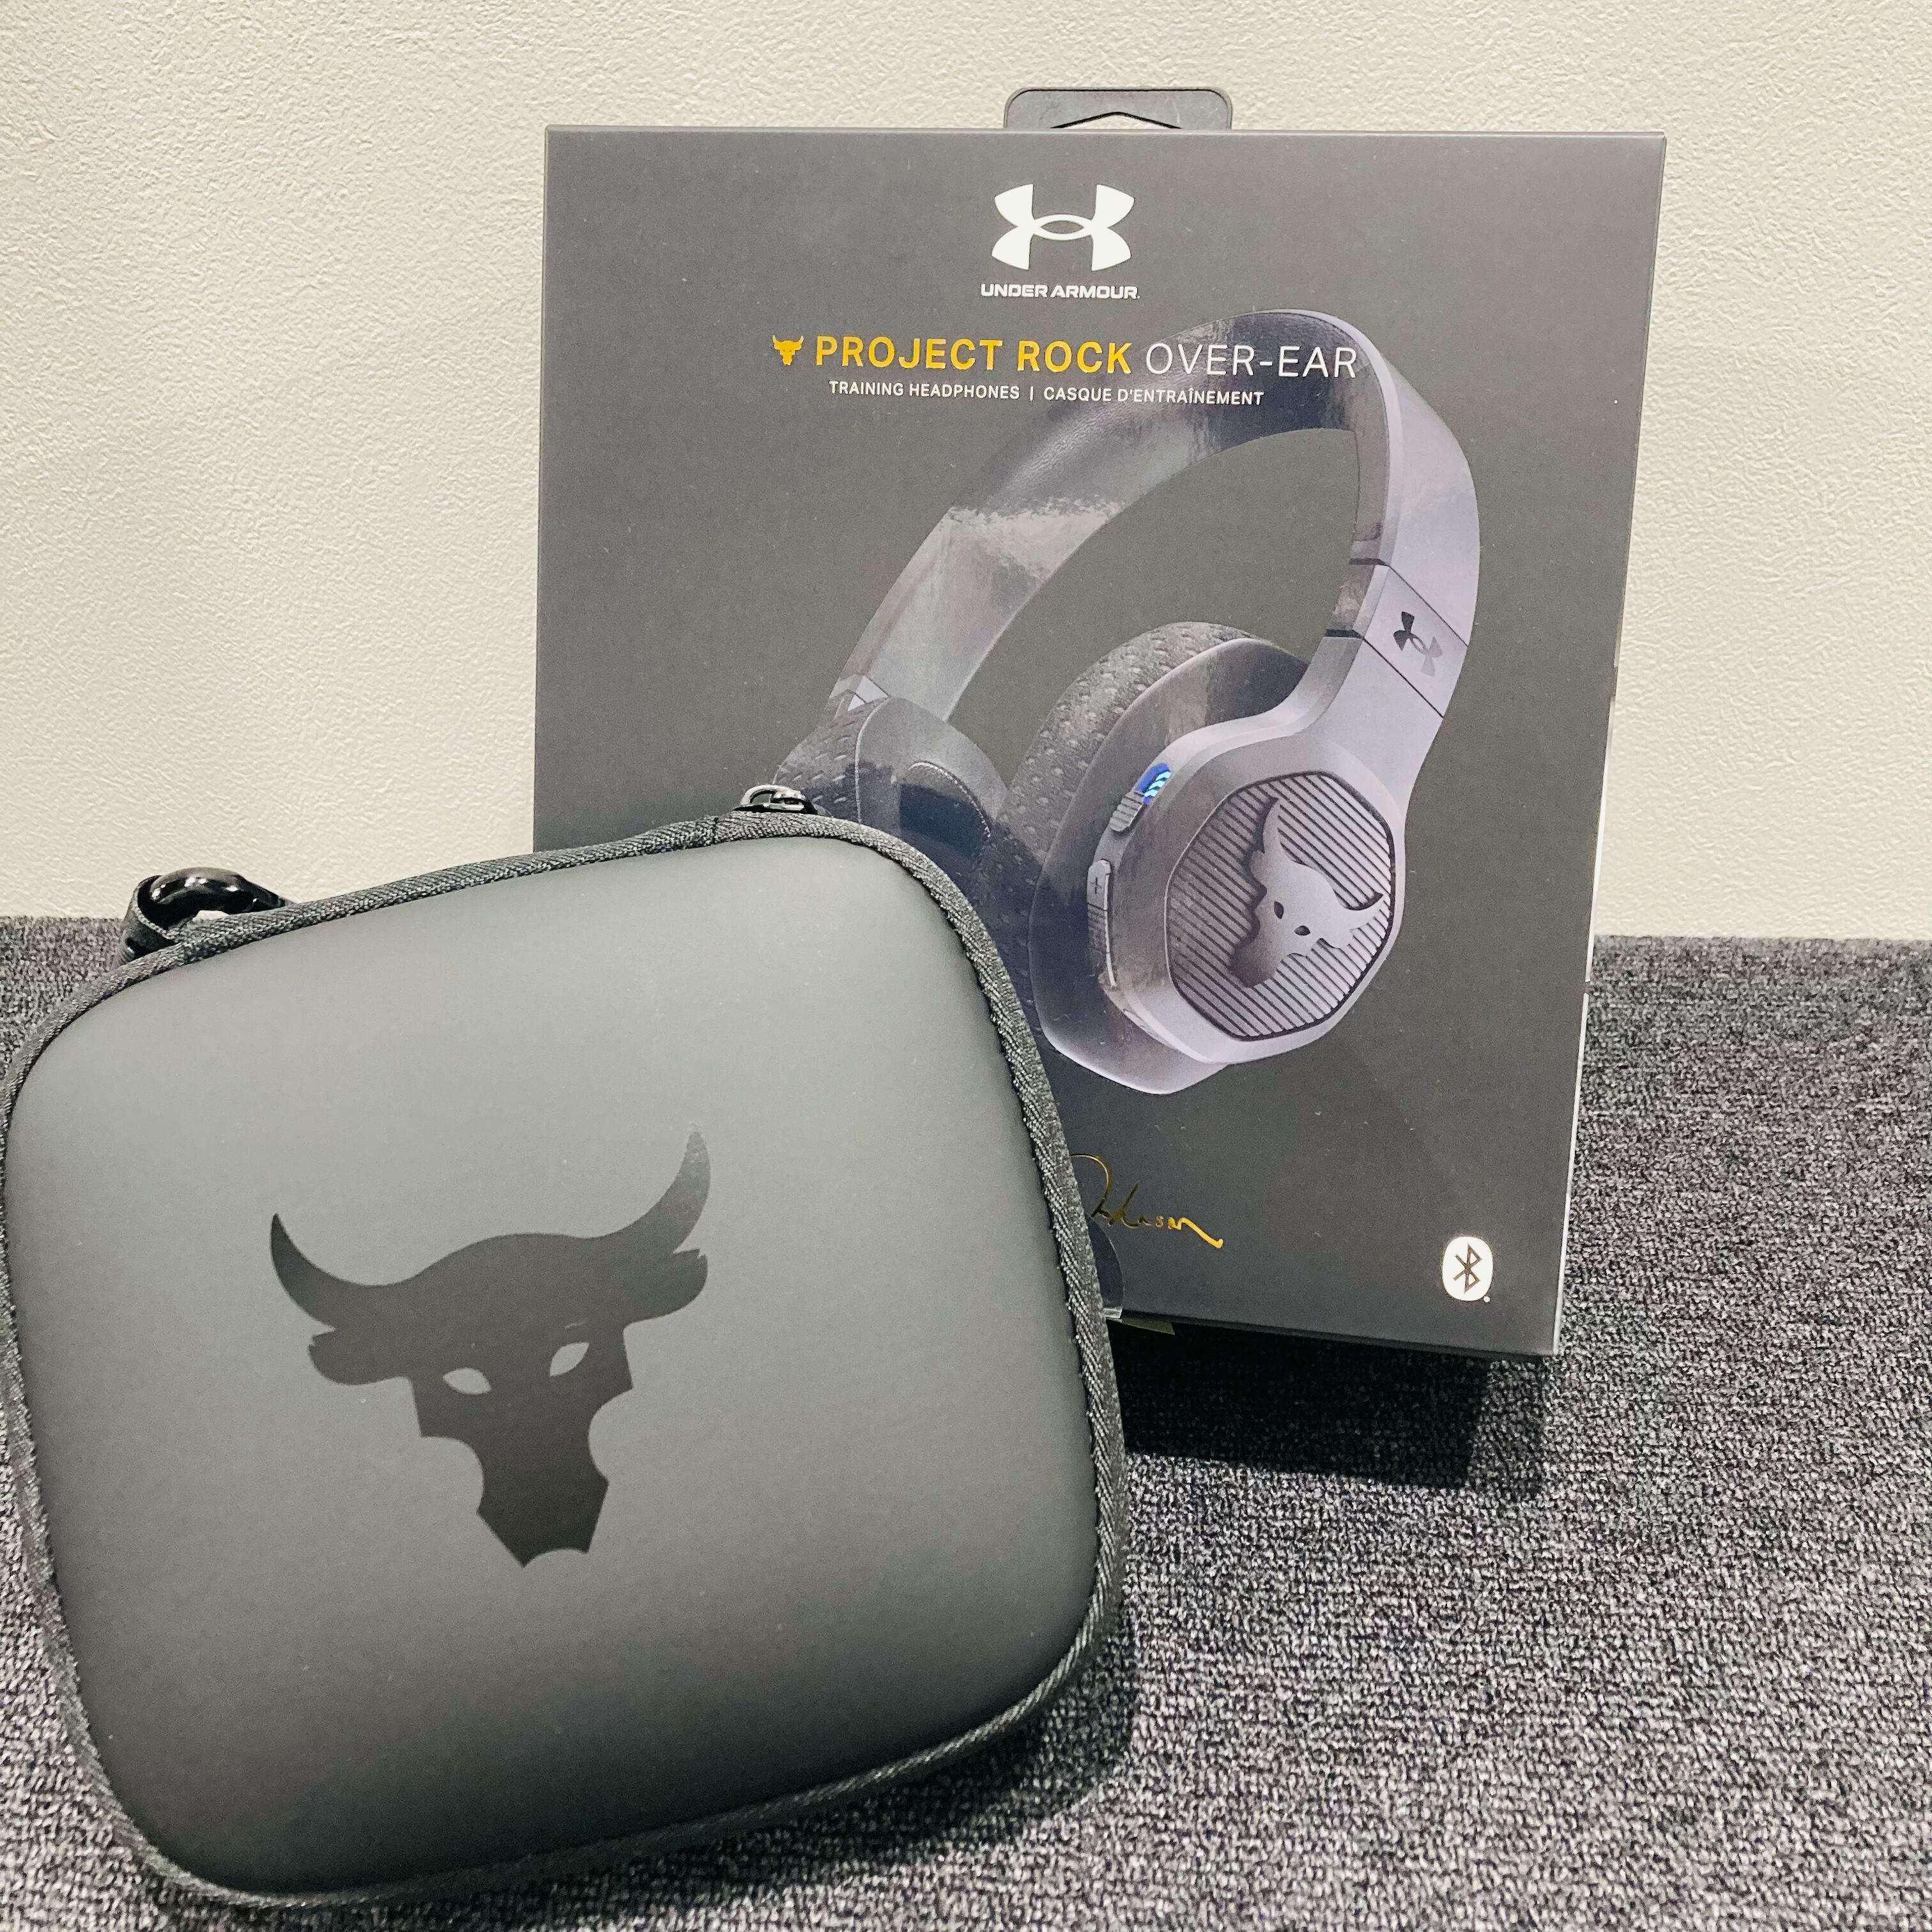 PROJECT ROCK OVER-EAR | UNDER ARMOUR CLUBHOUSE いわきラトブ | SHOP 